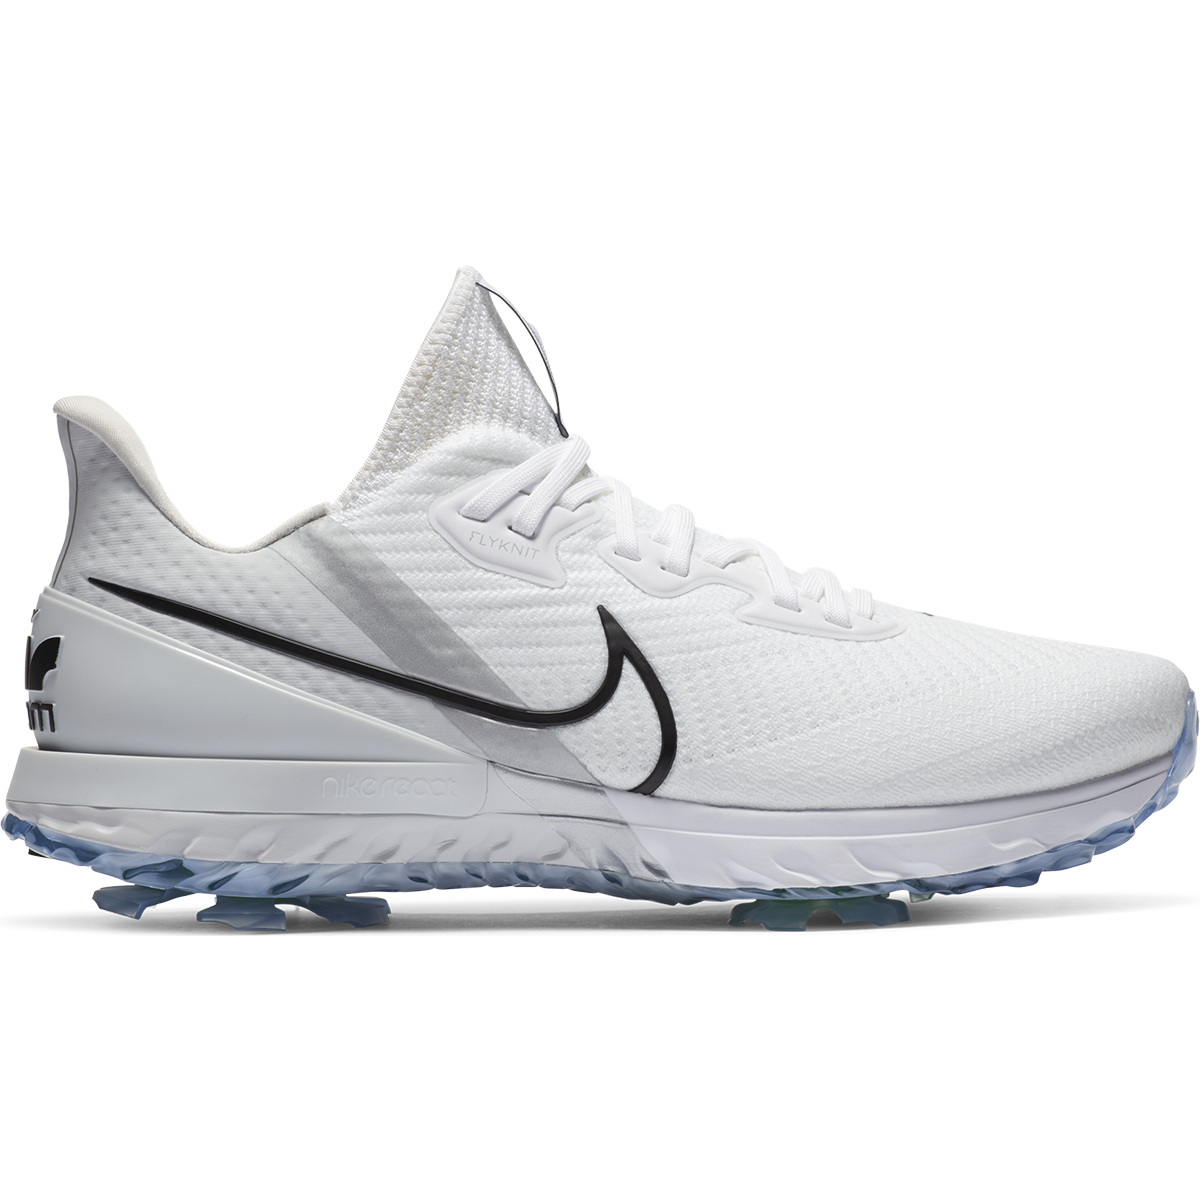 nike gray golf shoes